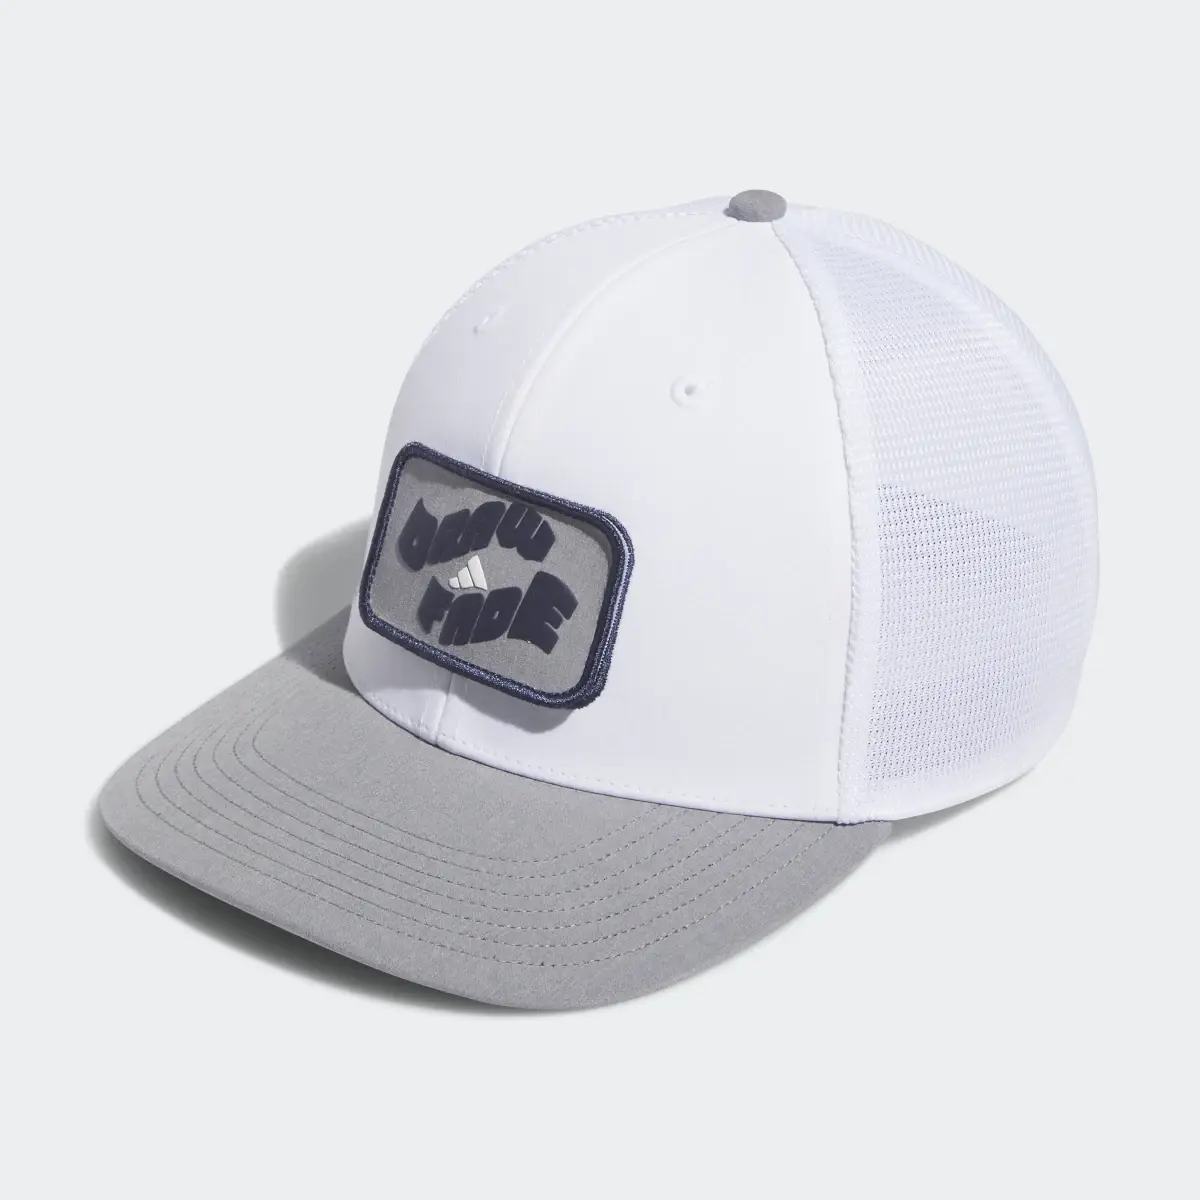 Adidas Two-in-One Golf Hat With Removable Patch. 2